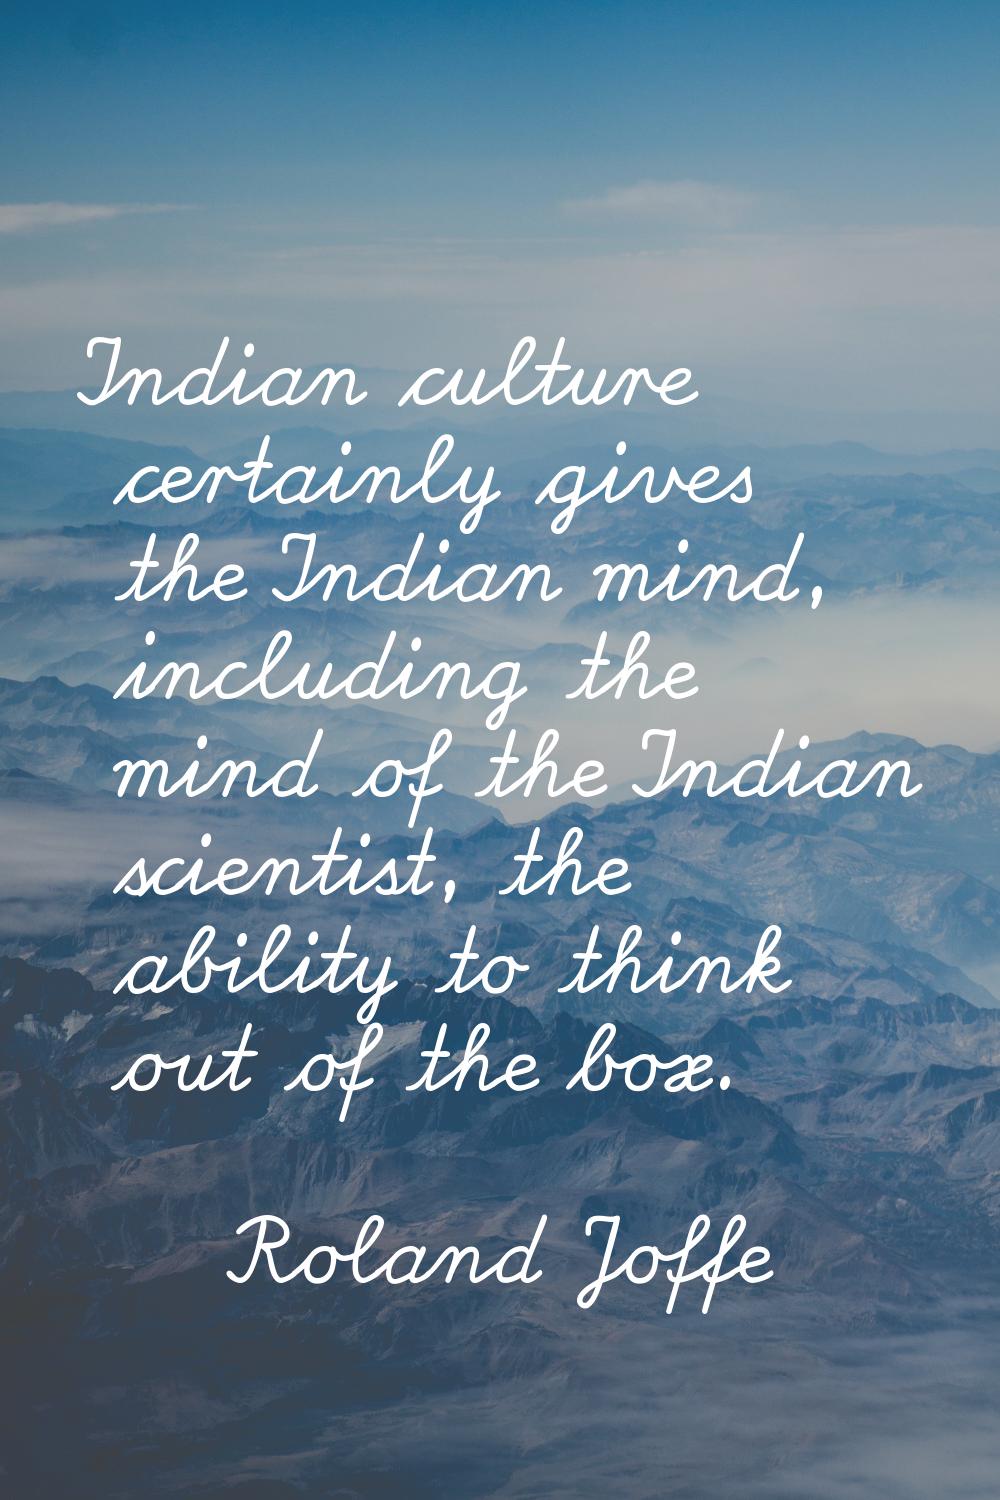 Indian culture certainly gives the Indian mind, including the mind of the Indian scientist, the abi